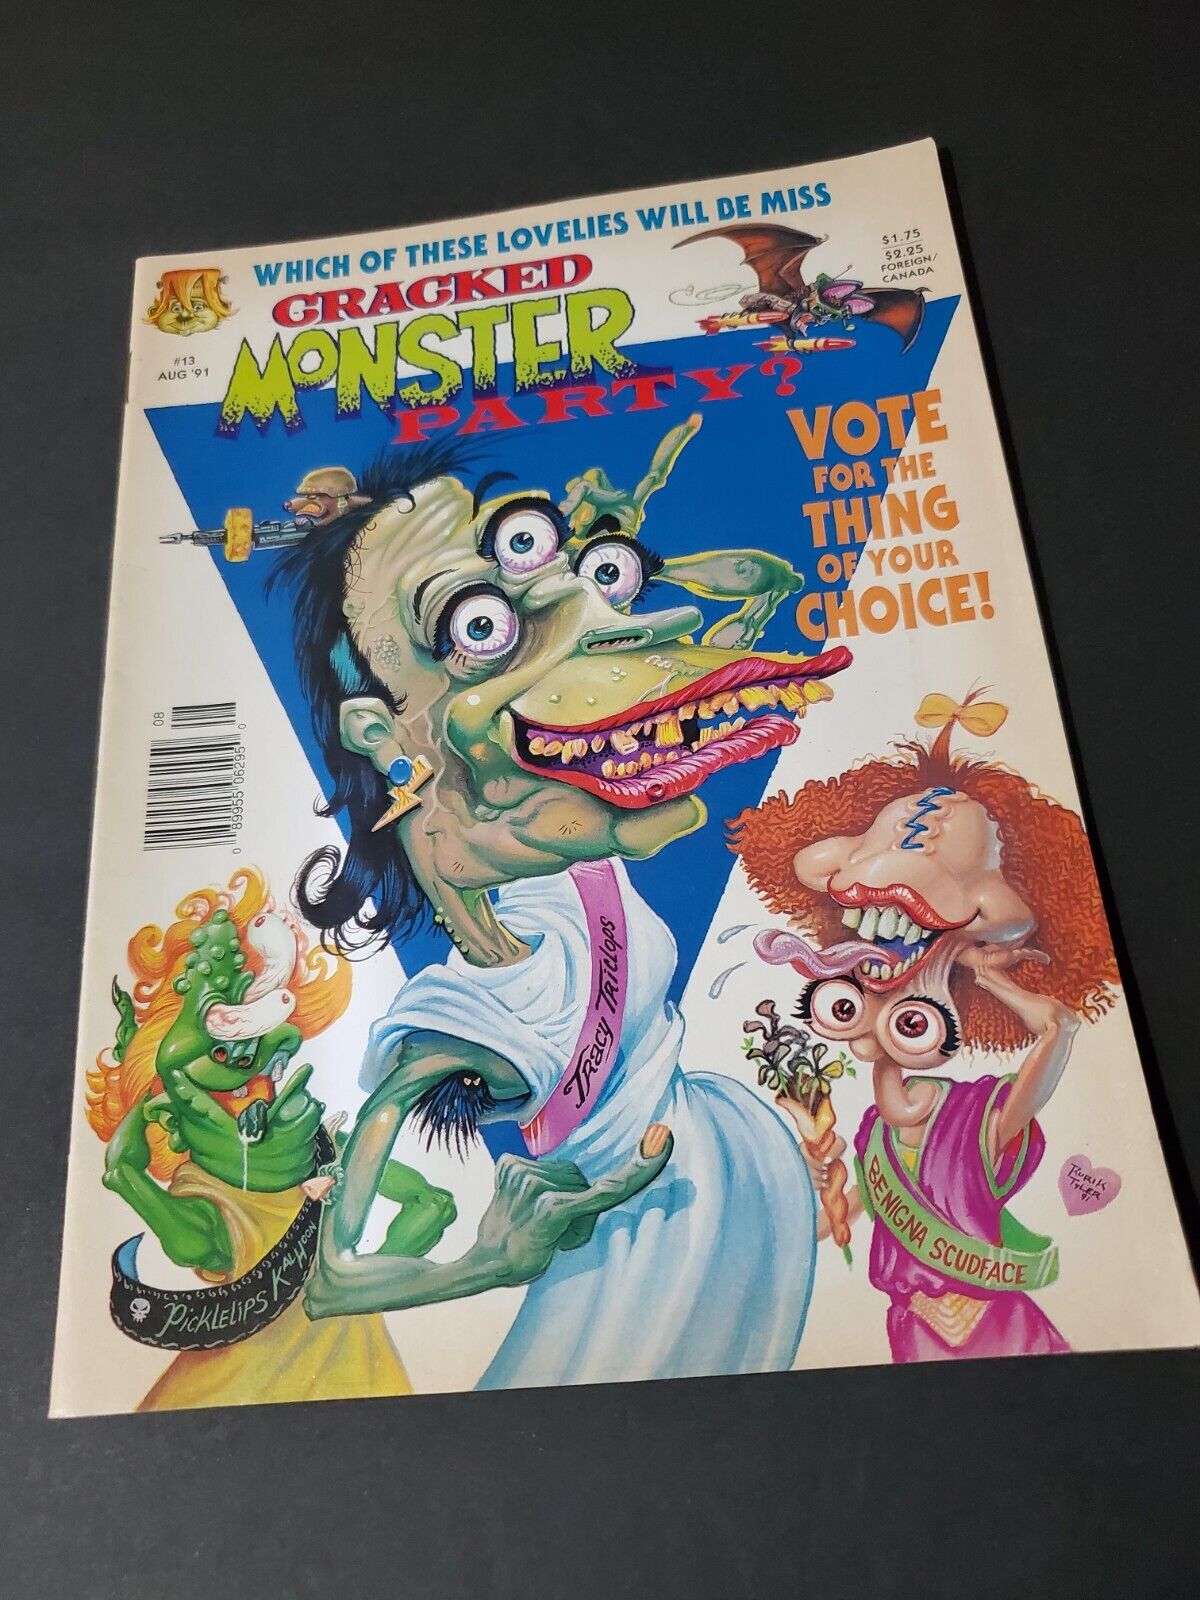 CRACKED MONSTER PARTY 13 AUG 91